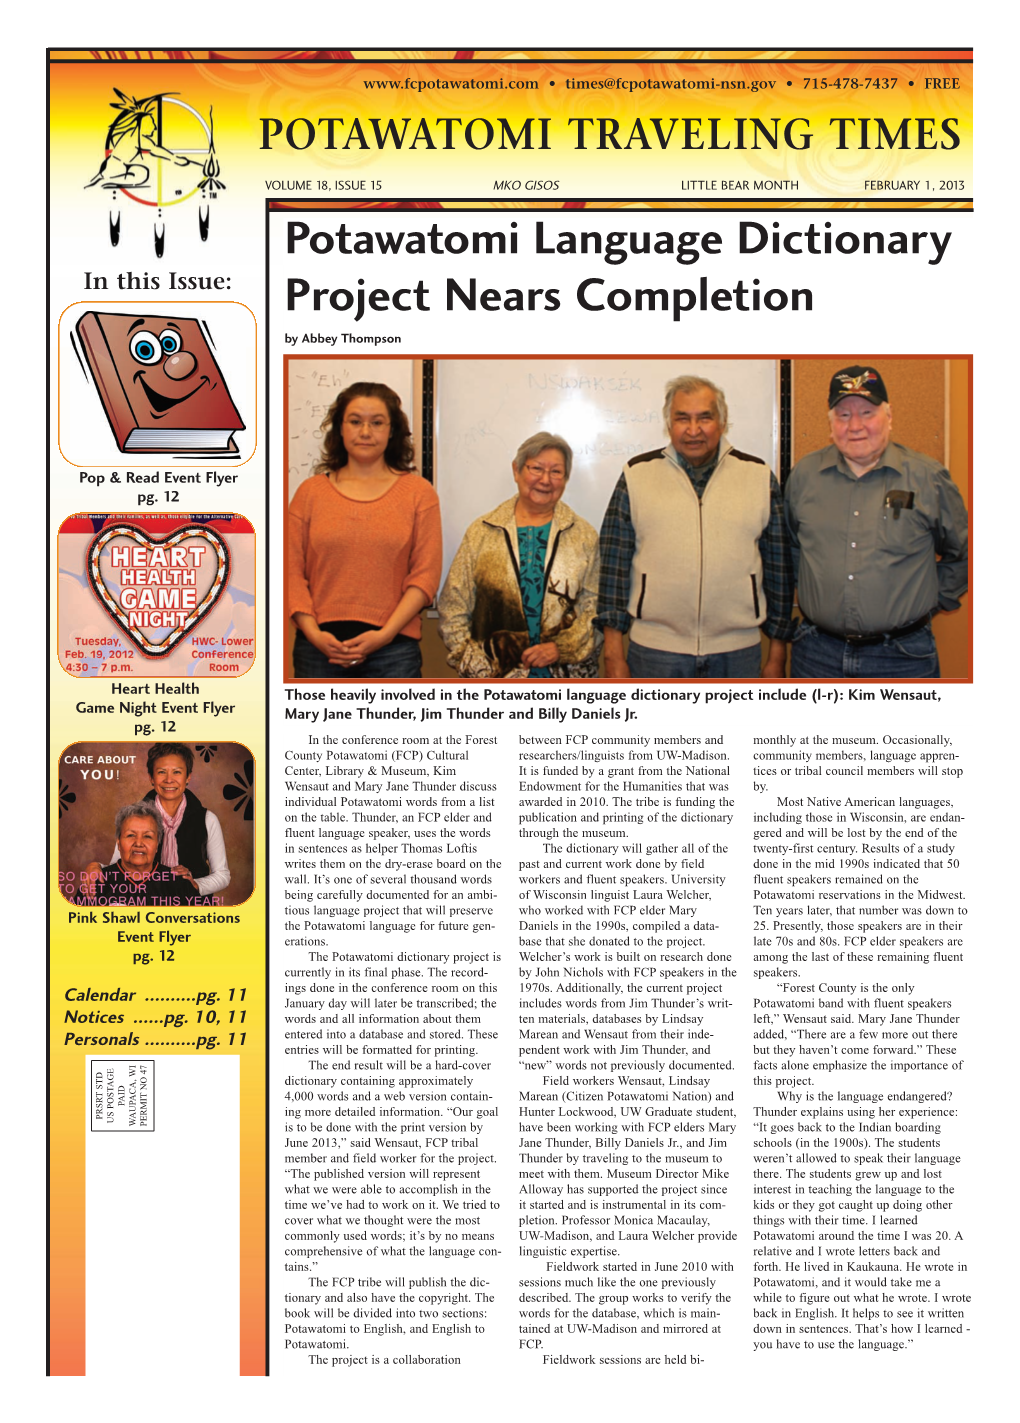 Potawatomi Language Dictionary Project Nears Completion